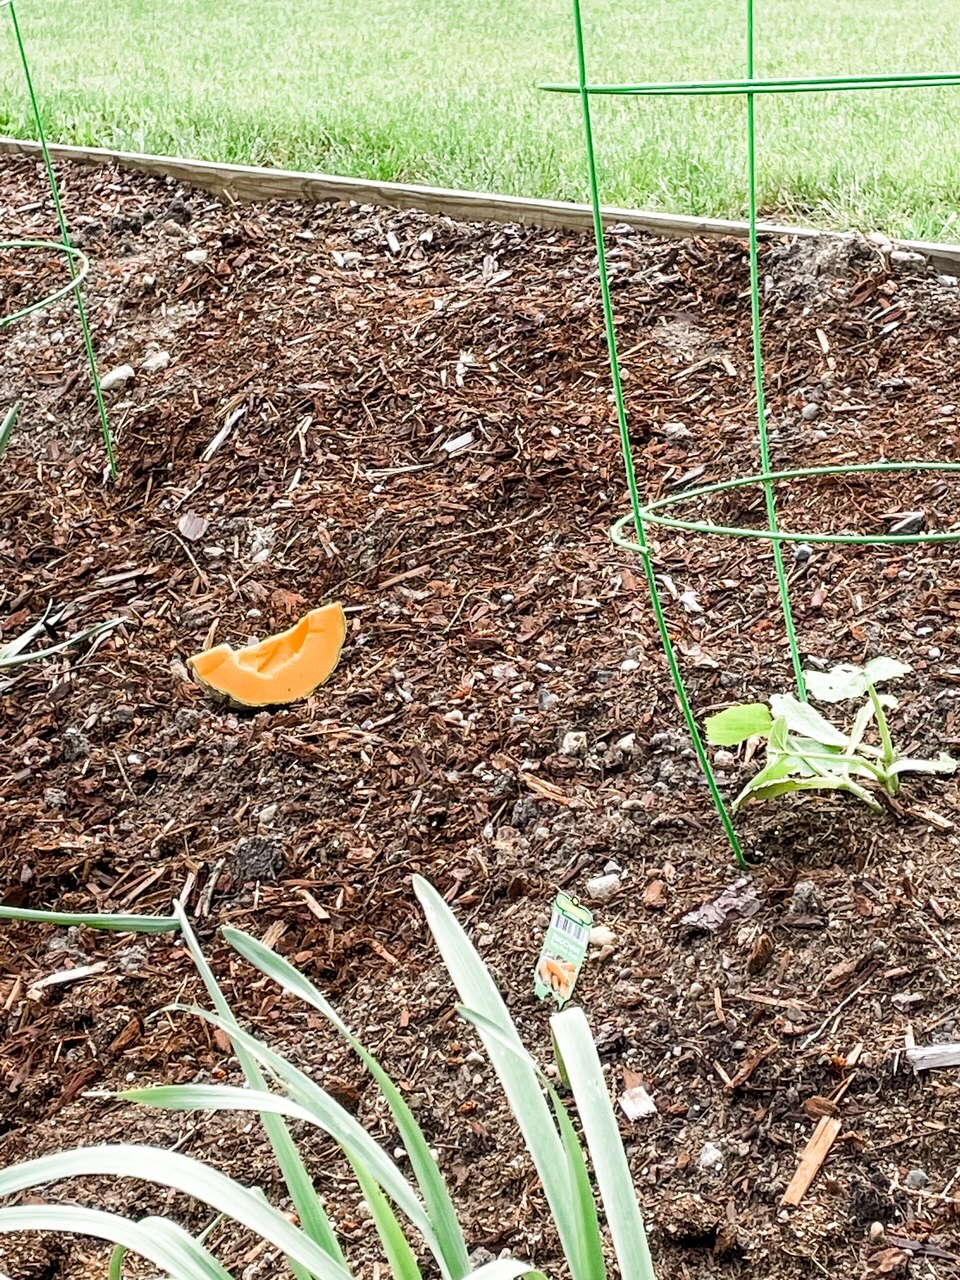 A melon placed to attract slugs for relocation - one of the methods of Natural Garden Pest Control